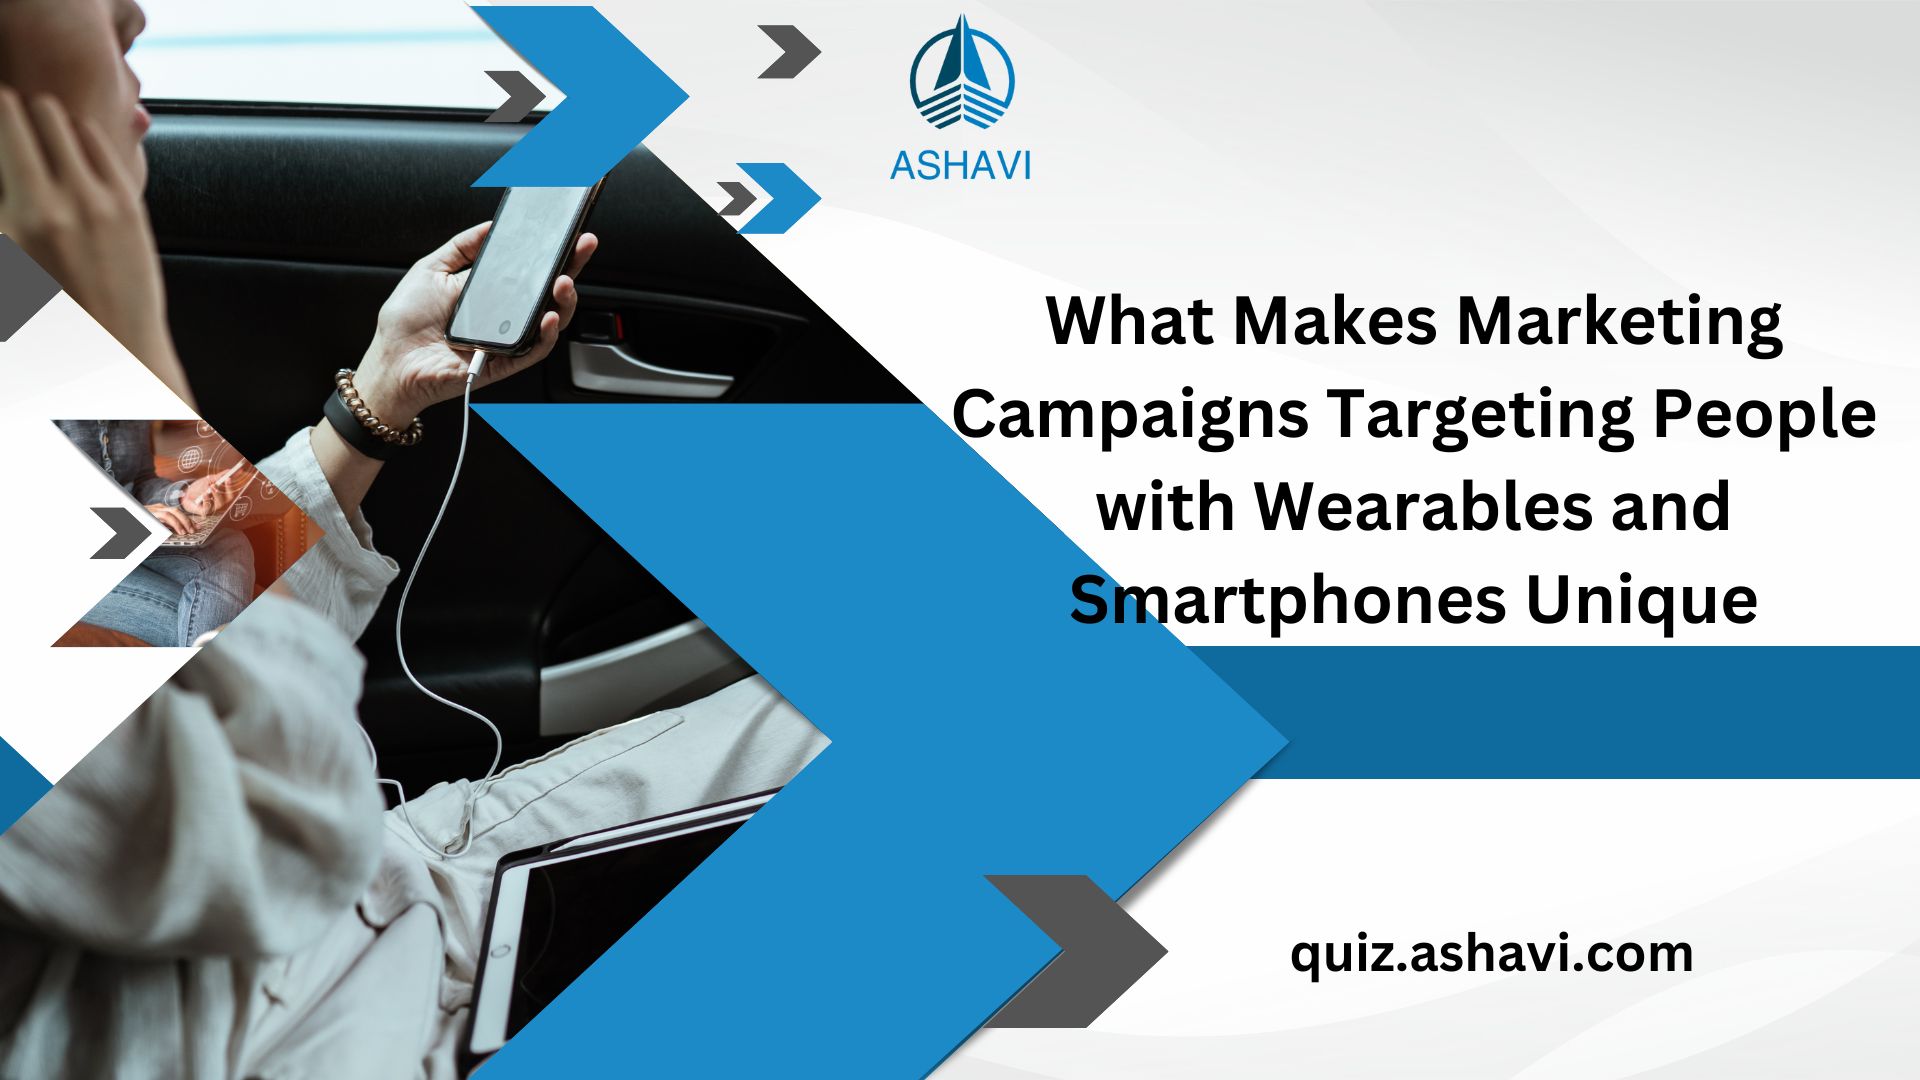 What Makes Marketing Campaigns Targeting People with Wearables and Smartphones Unique